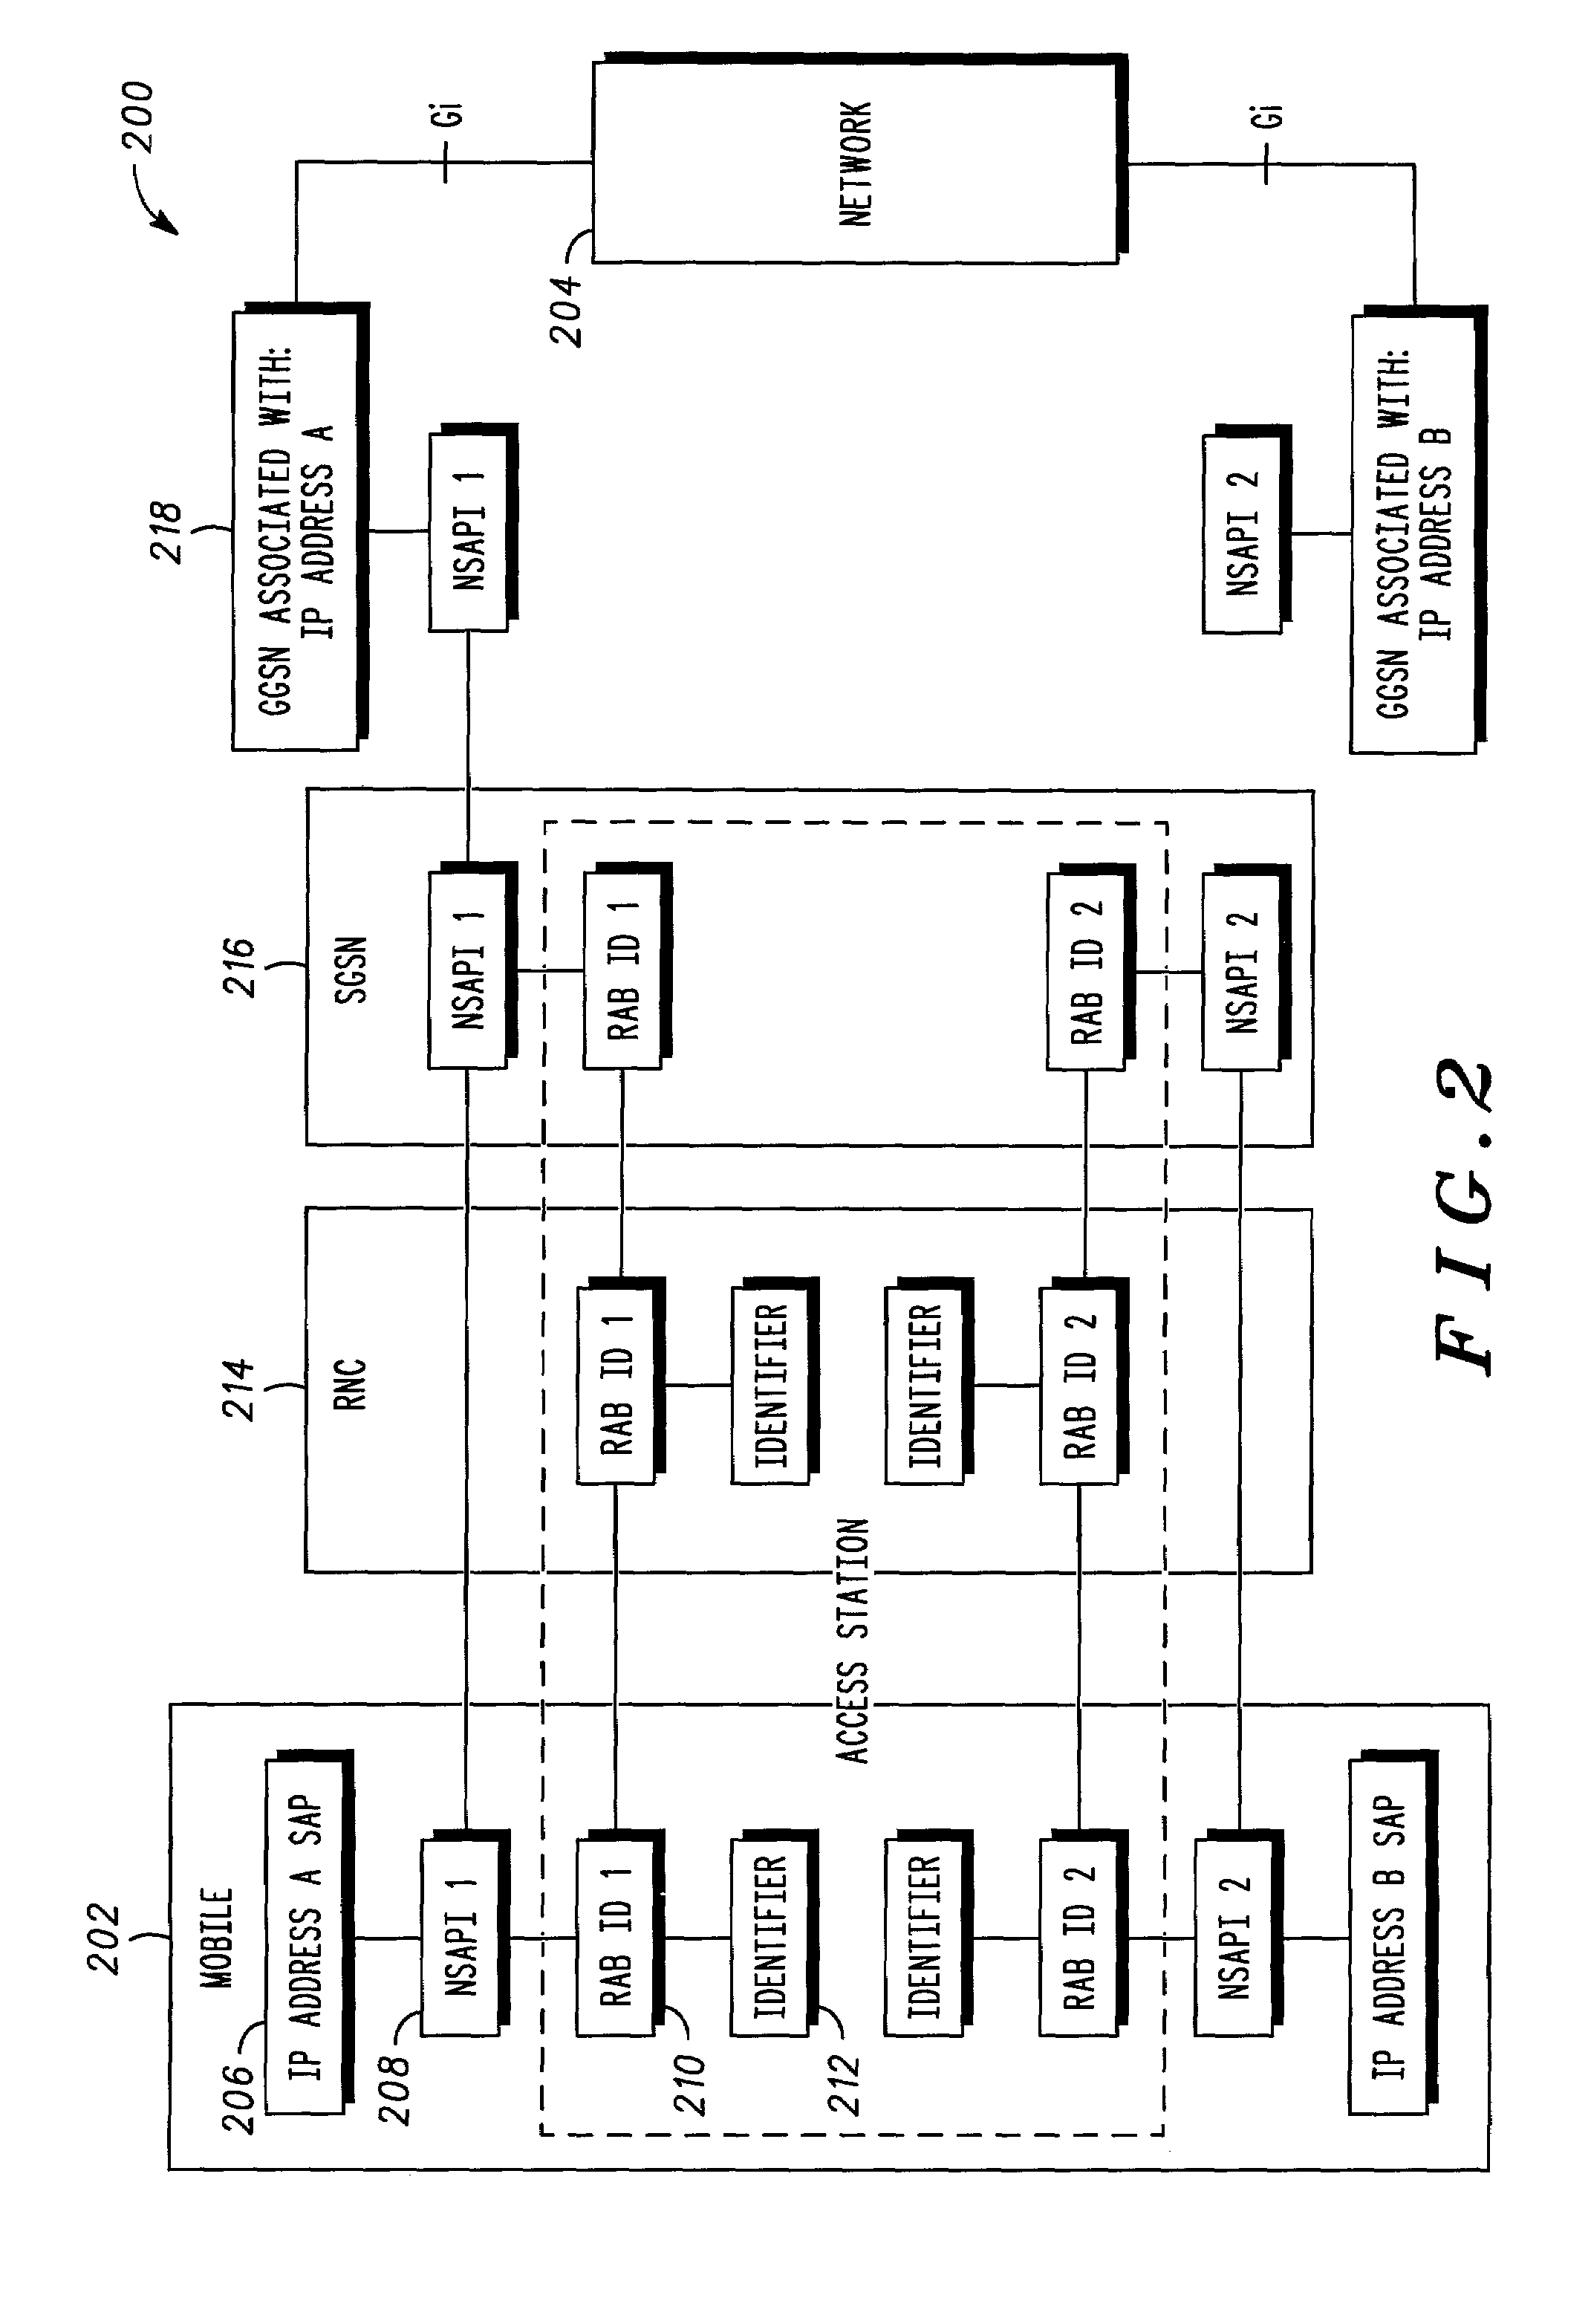 Method and apparatus for controlling multiple logical data flow in a variable data rate environment